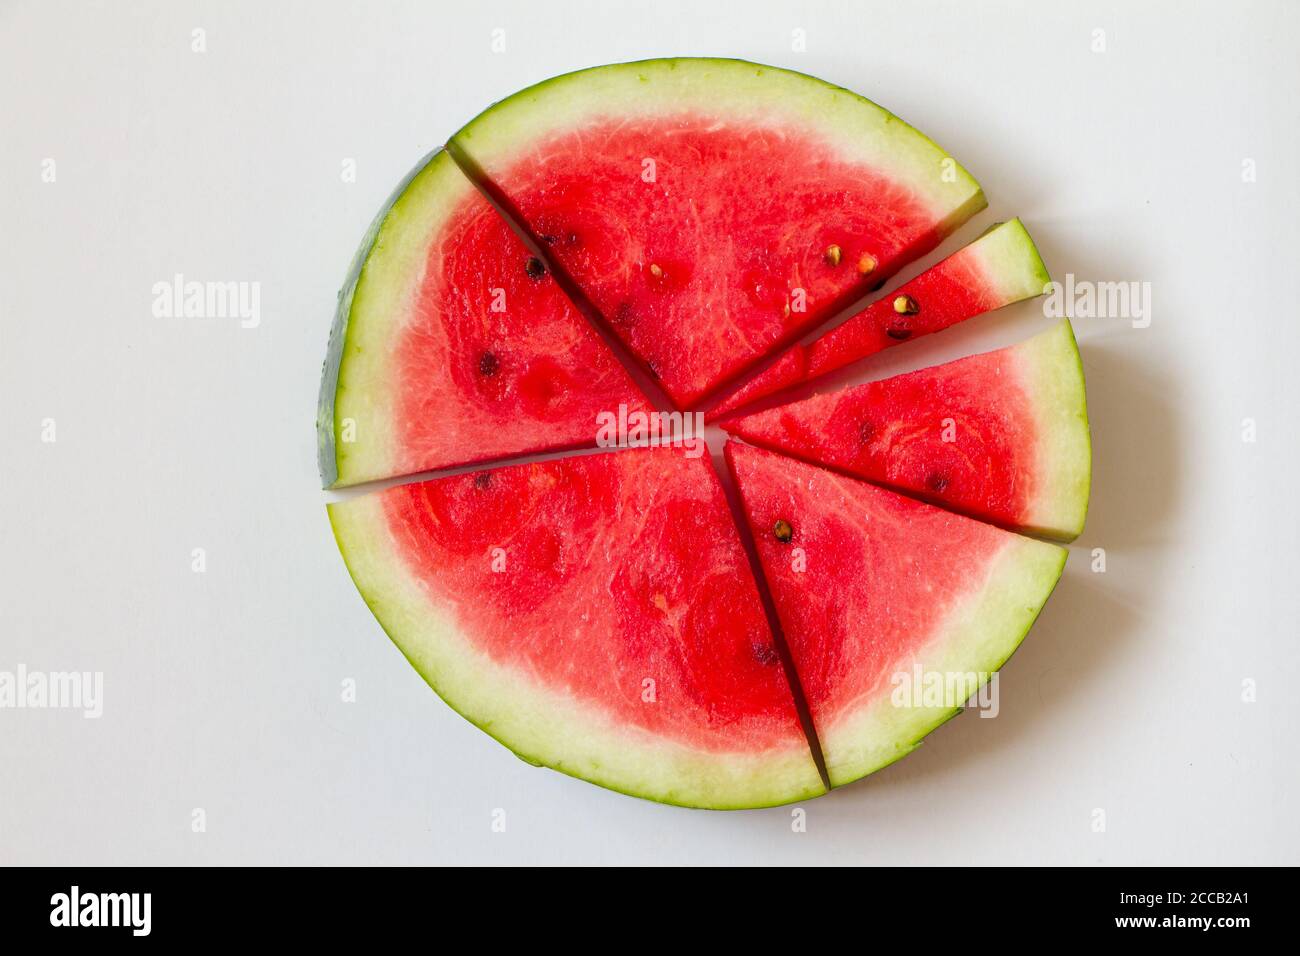 Few slices of ripe watermelon on white background, top view Stock Photo